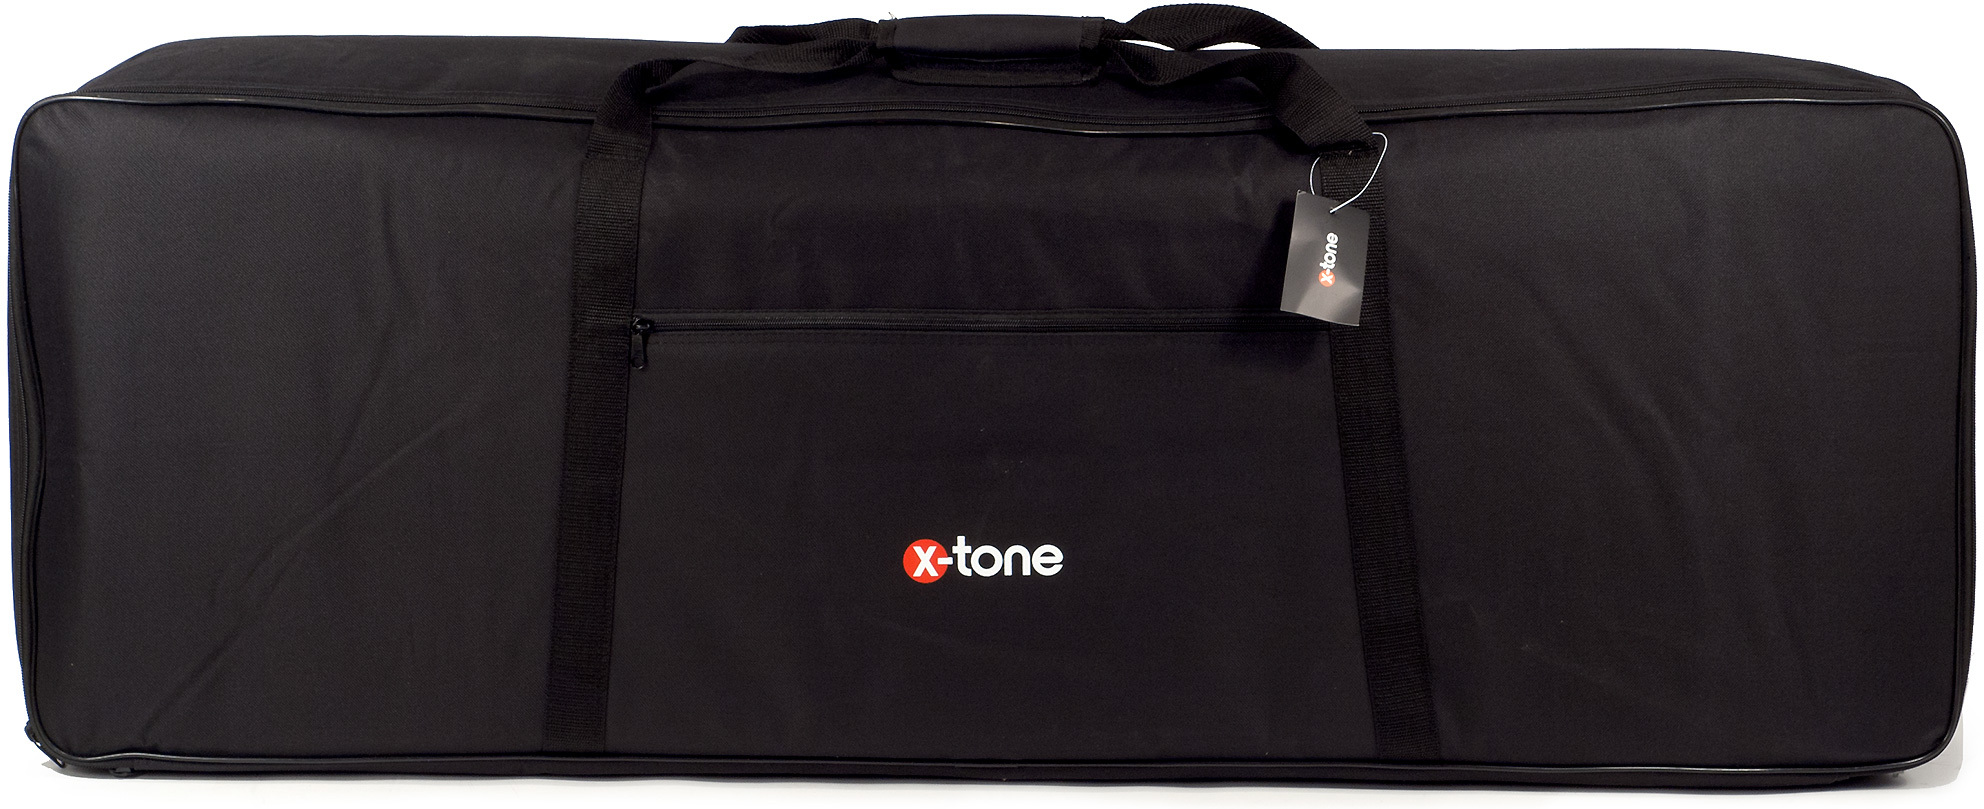 X-tone 2102 Pour Clavier 88 Notes En 10 Mm Black - Gigbag for Keyboard - Main picture